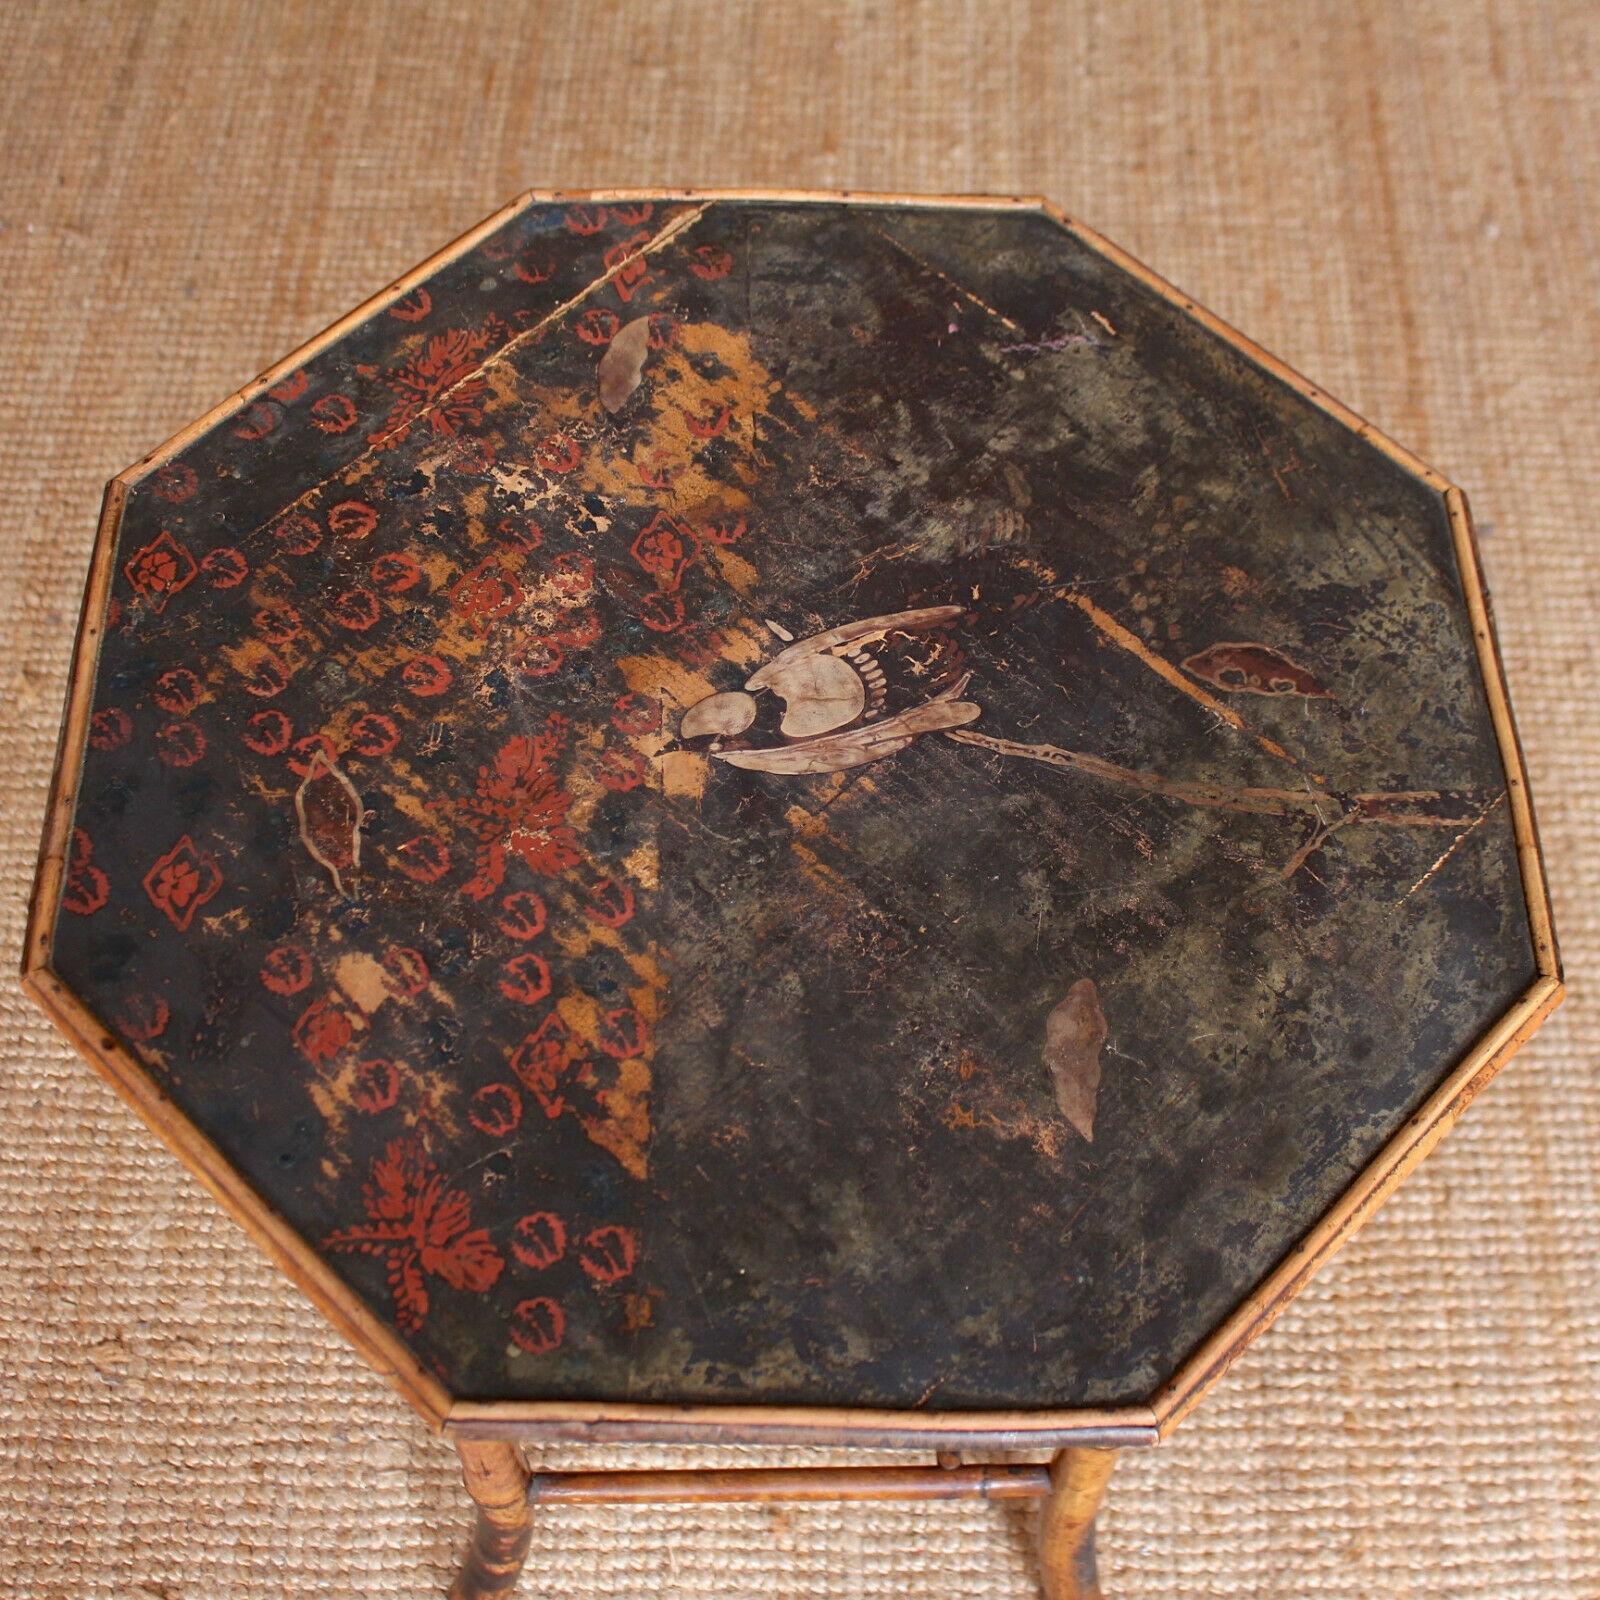 19th century octagonal burnt bamboo lamp table.
The lacquered tray top with bird decoration raised on bamboo cane legs with splayed feet, joined by canework lattice stretchers.